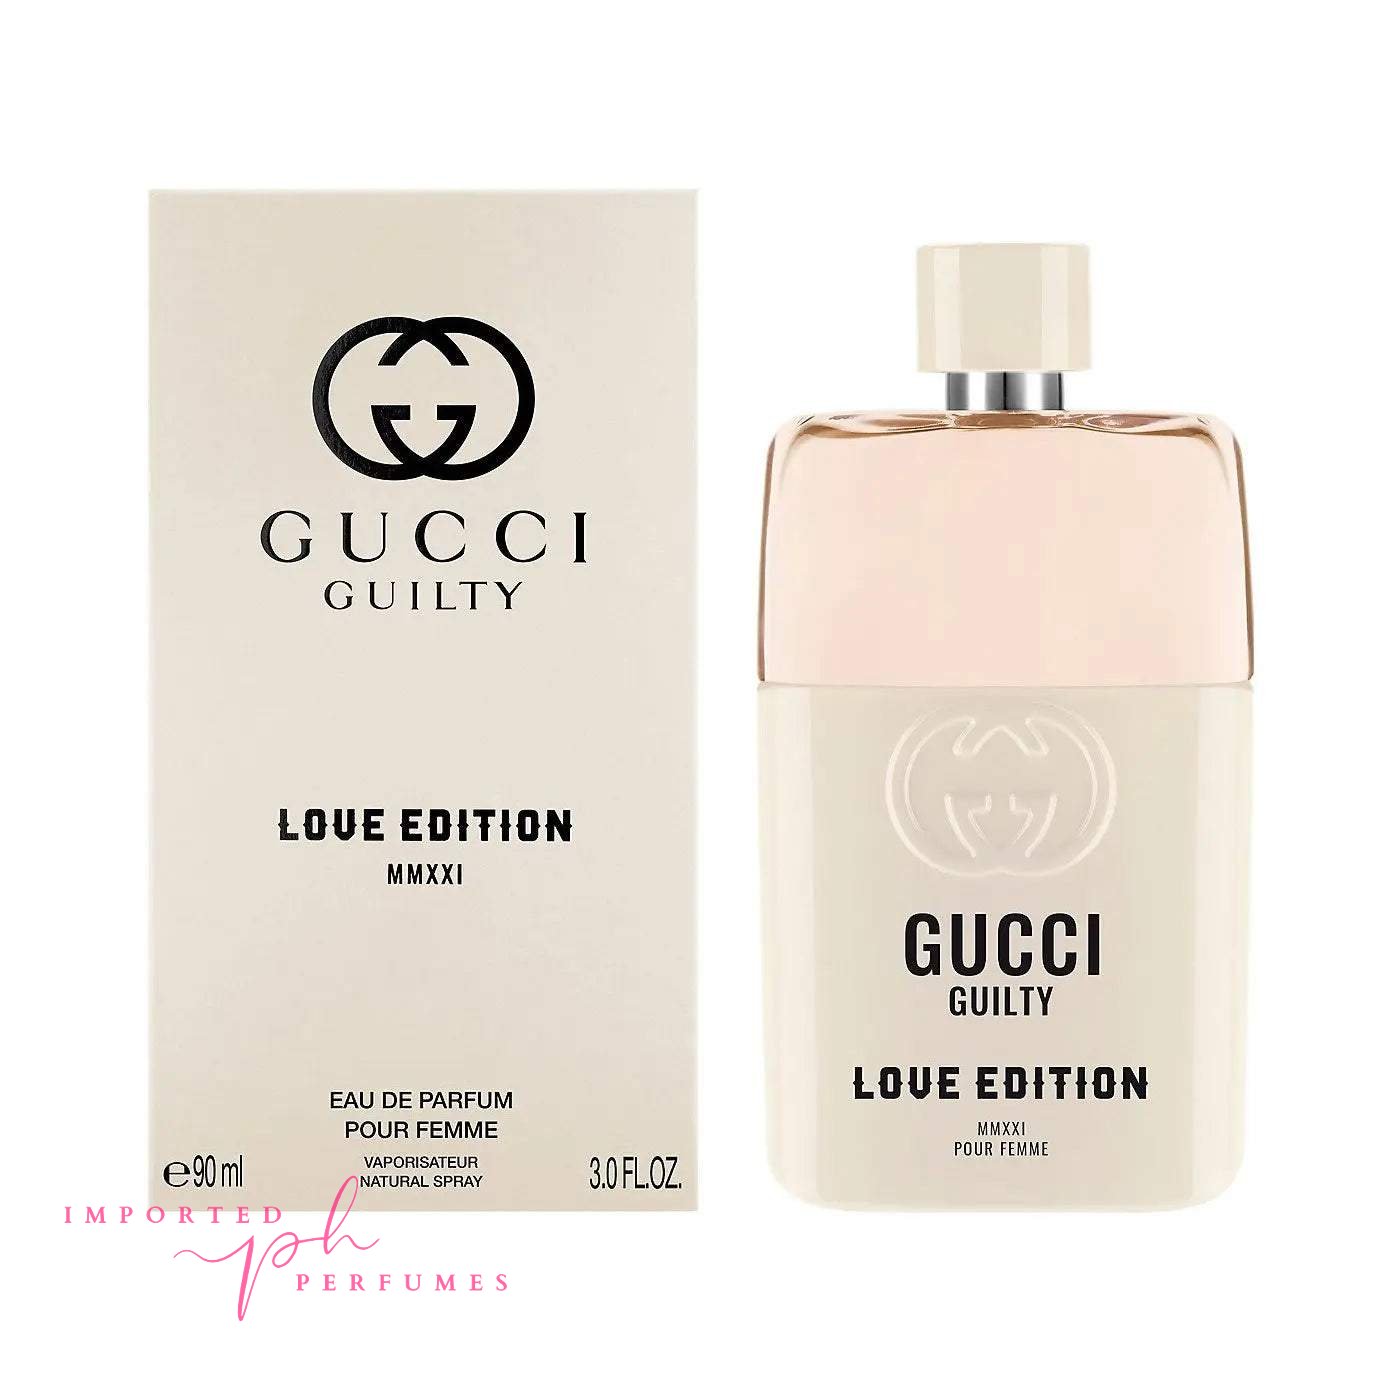 Guilty Guilty Love Edition MMXXI pour Femme EDP 90ml-Imported Perfumes Co-For women,Gucci,gucci guilty,Gucci Women,Love Edition,Love editionn,women,Women perfume